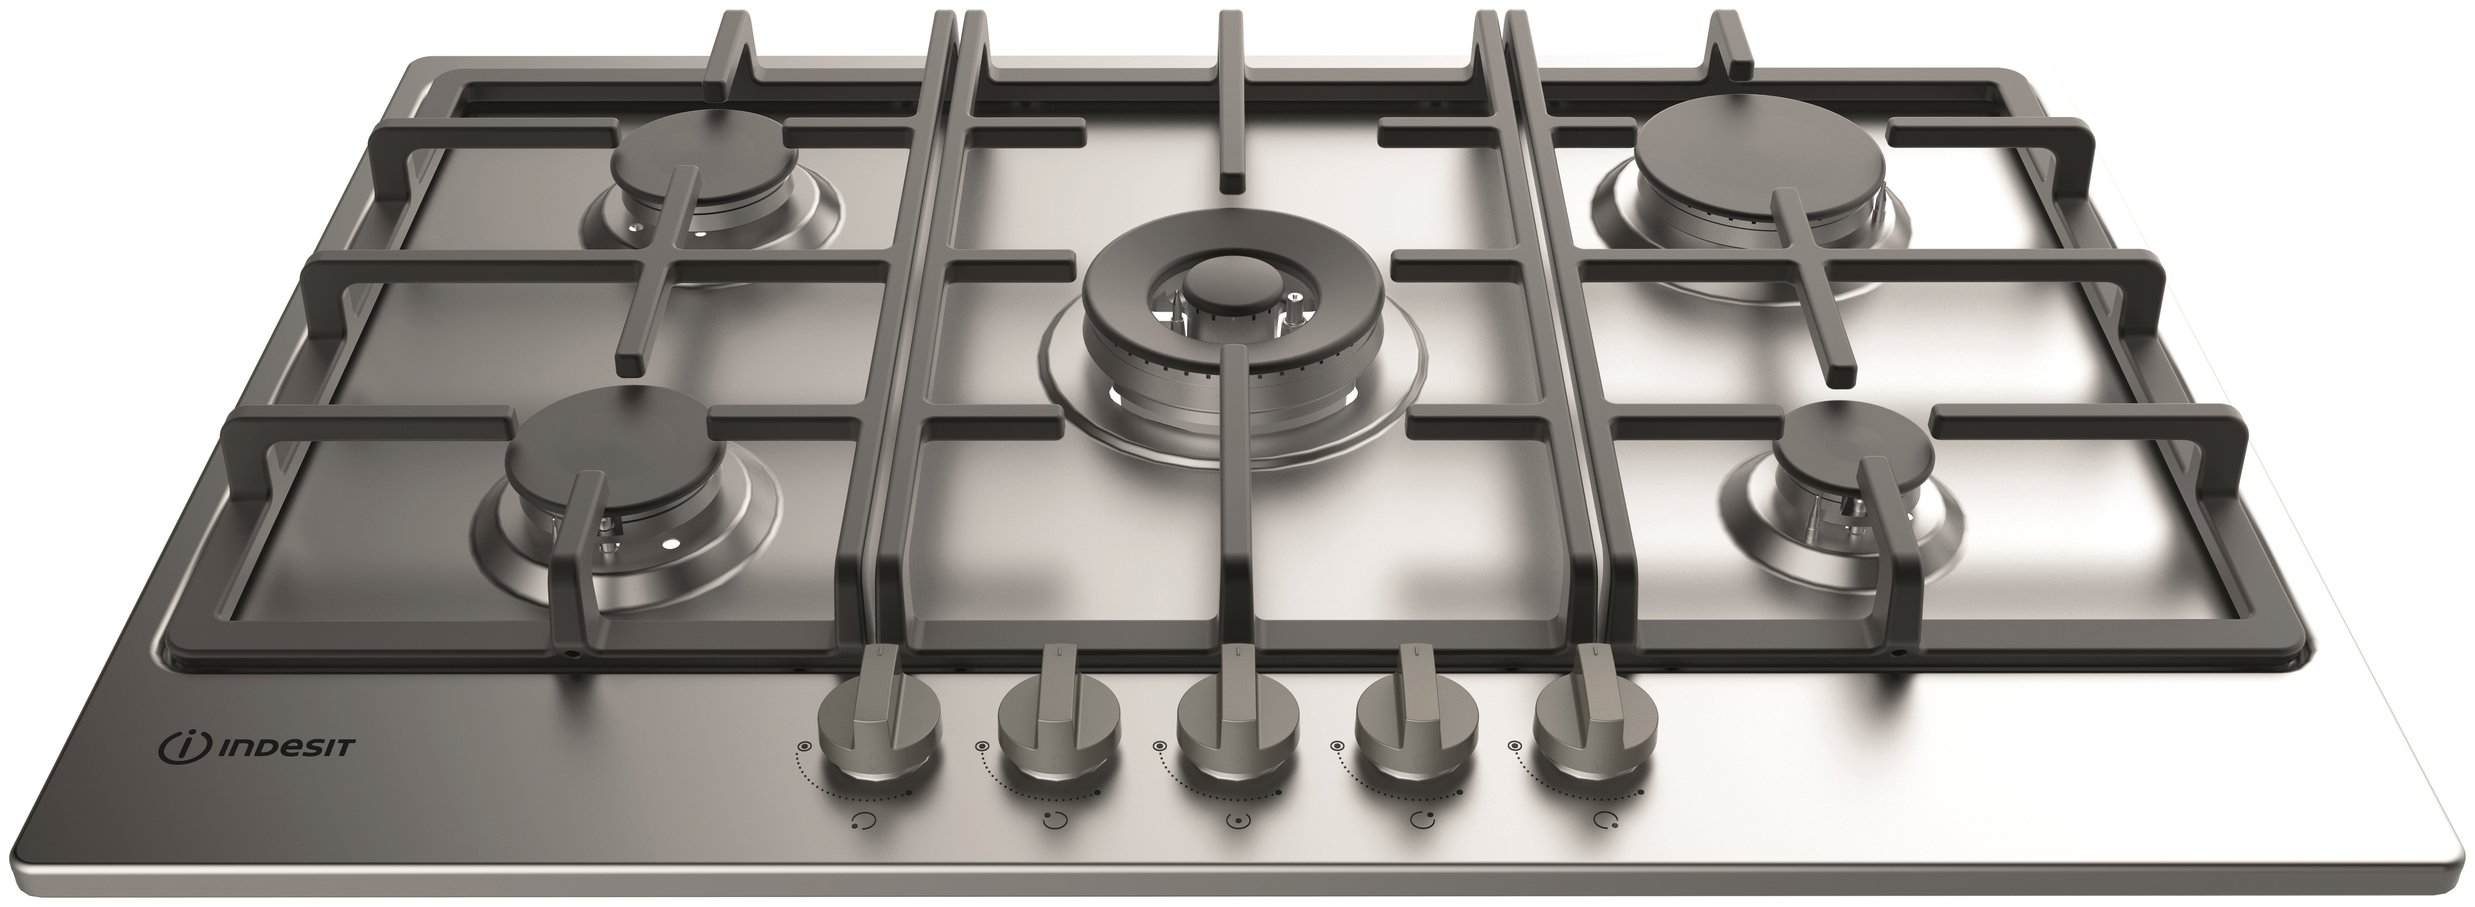 Indesit THP751WIXI Gas Hob - Stainless Steel